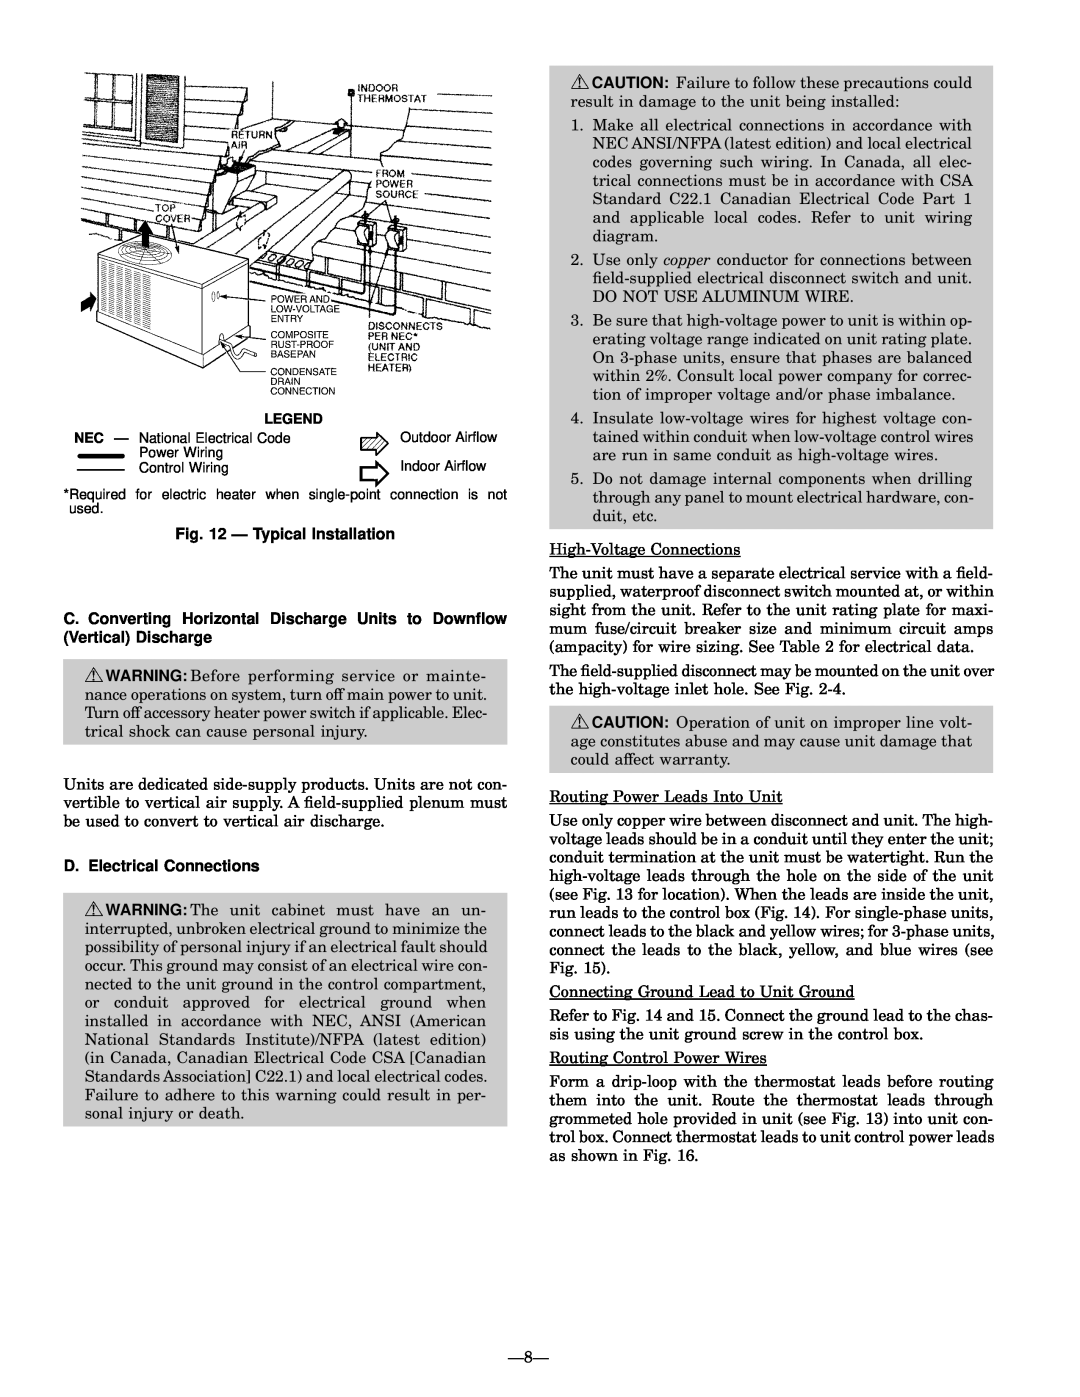 Bryant 764A installation instructions Ð Typical Installation, D. Electrical Connections 